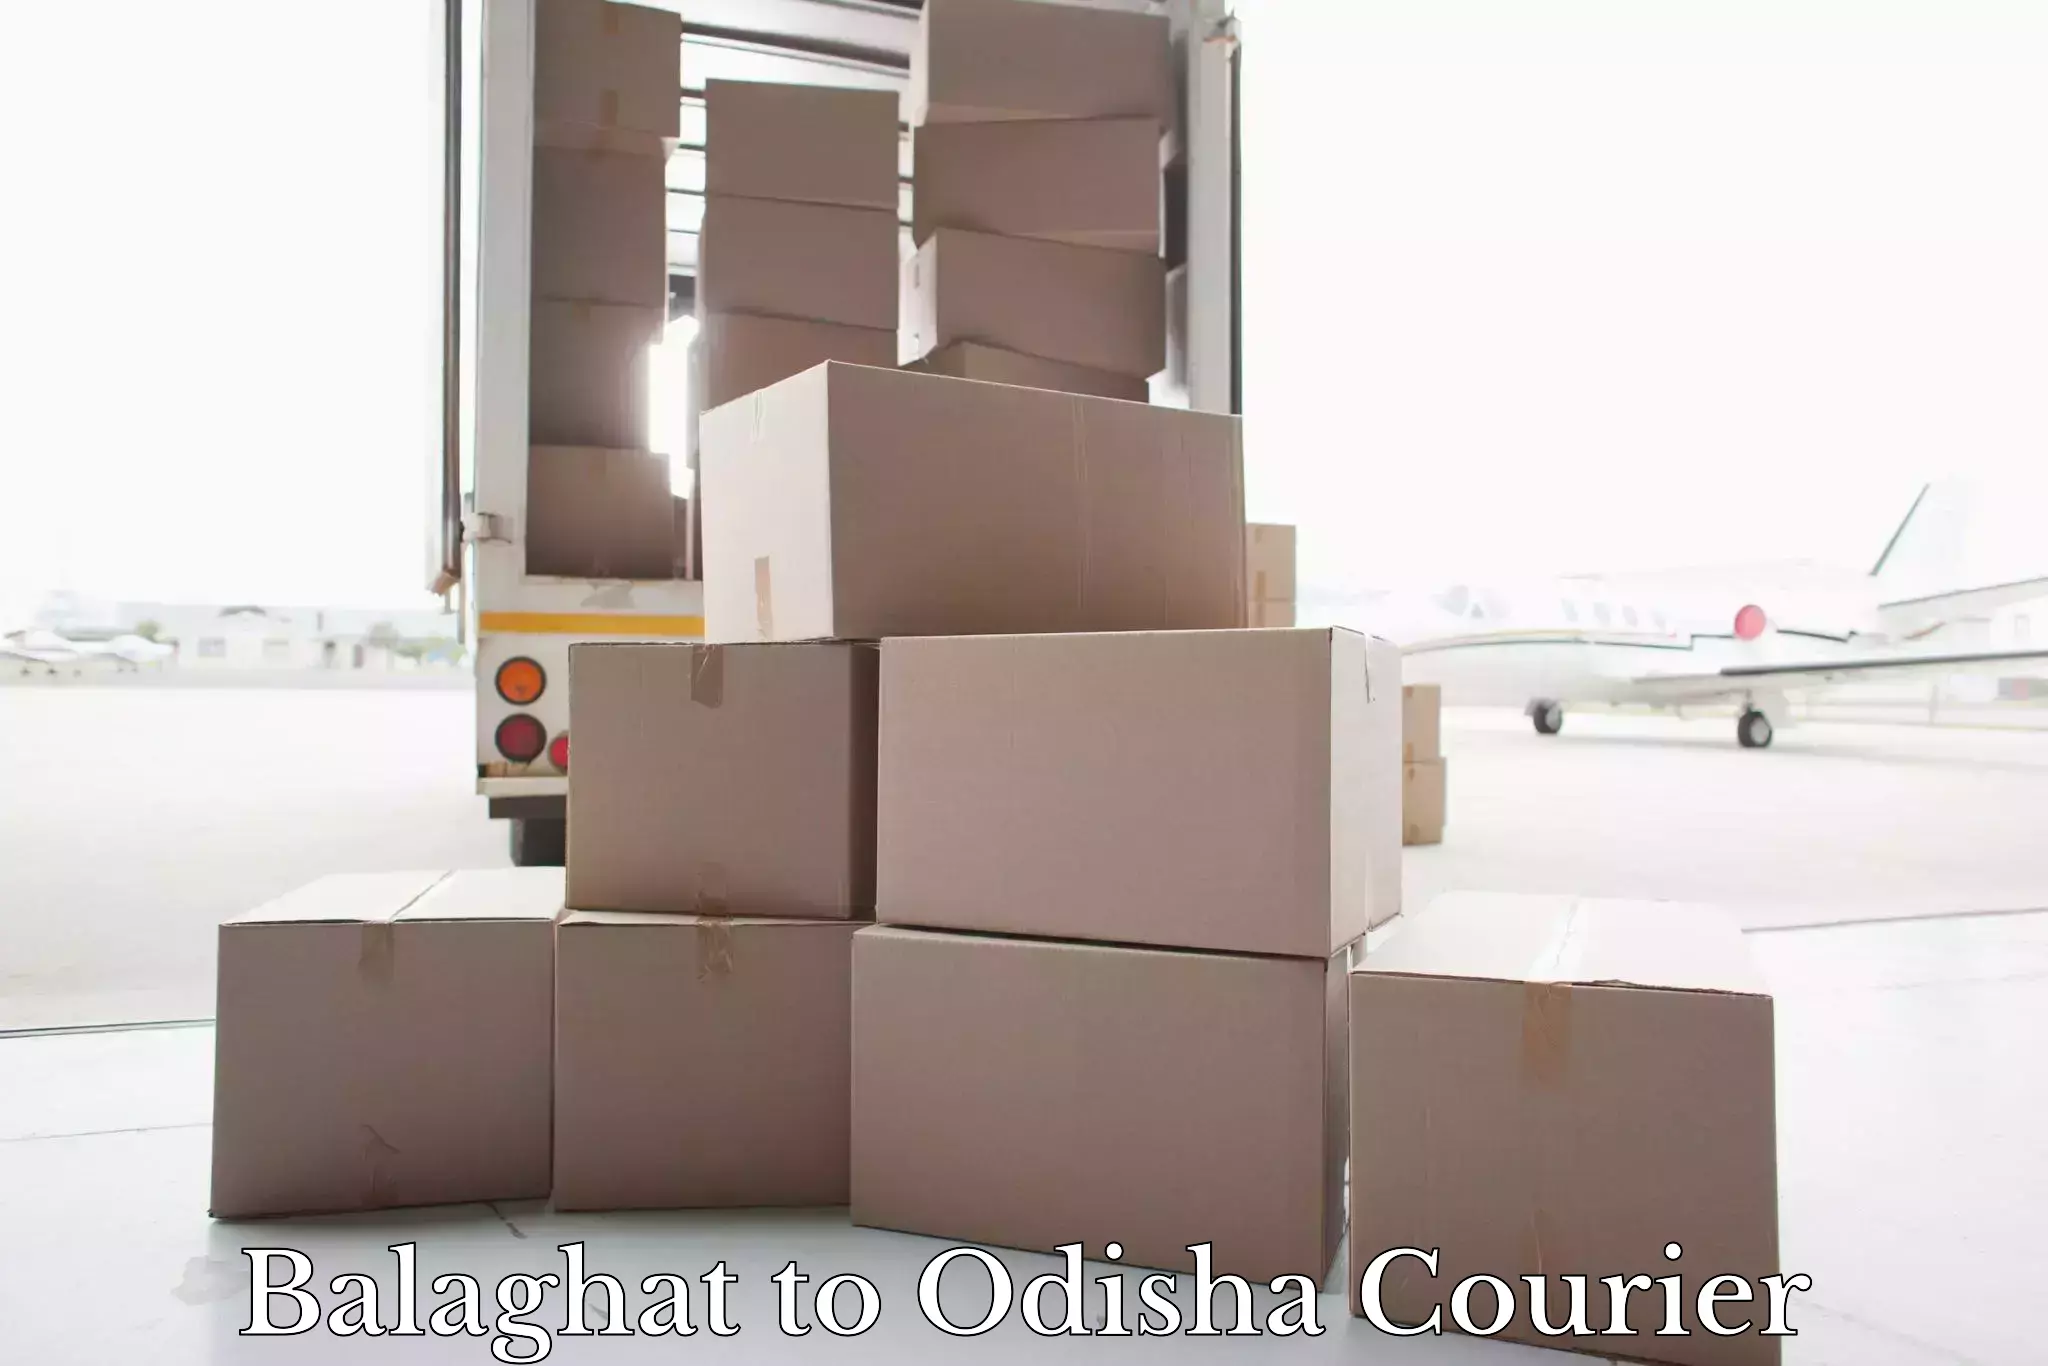 Luggage transport consultancy Balaghat to Odisha